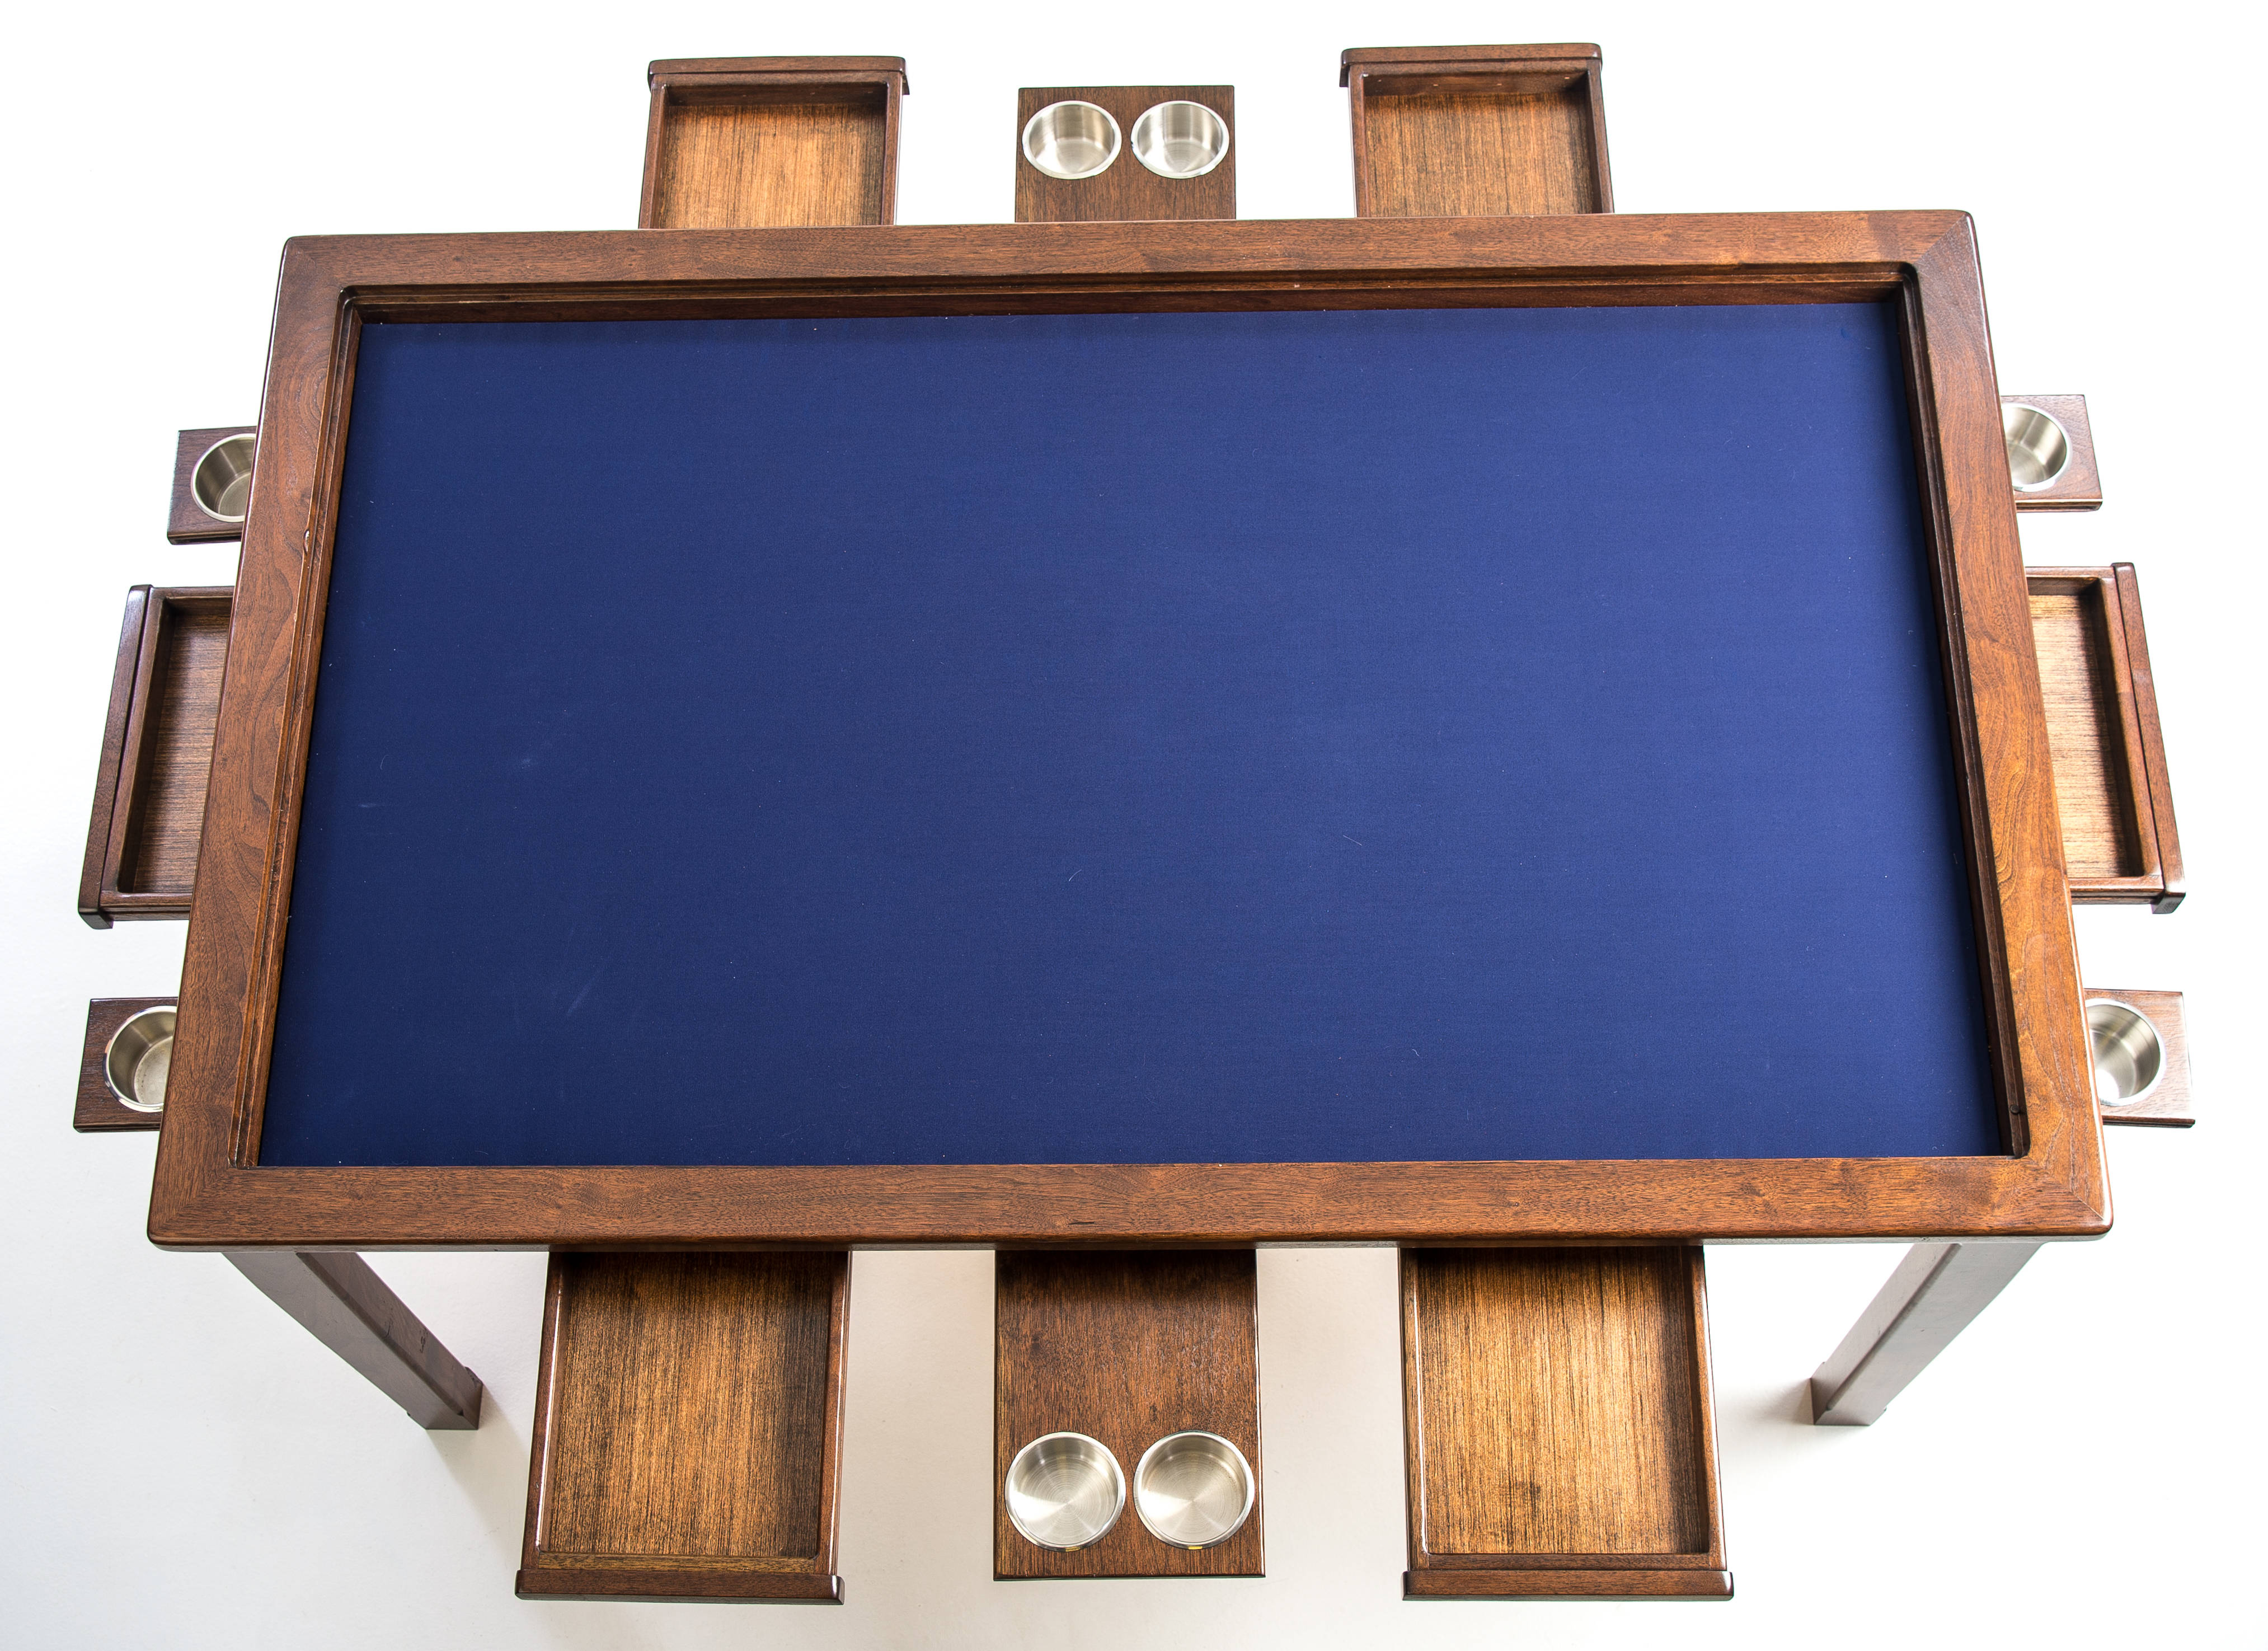 Costume Best Gaming Table Dimensions with Wall Mounted Monitor